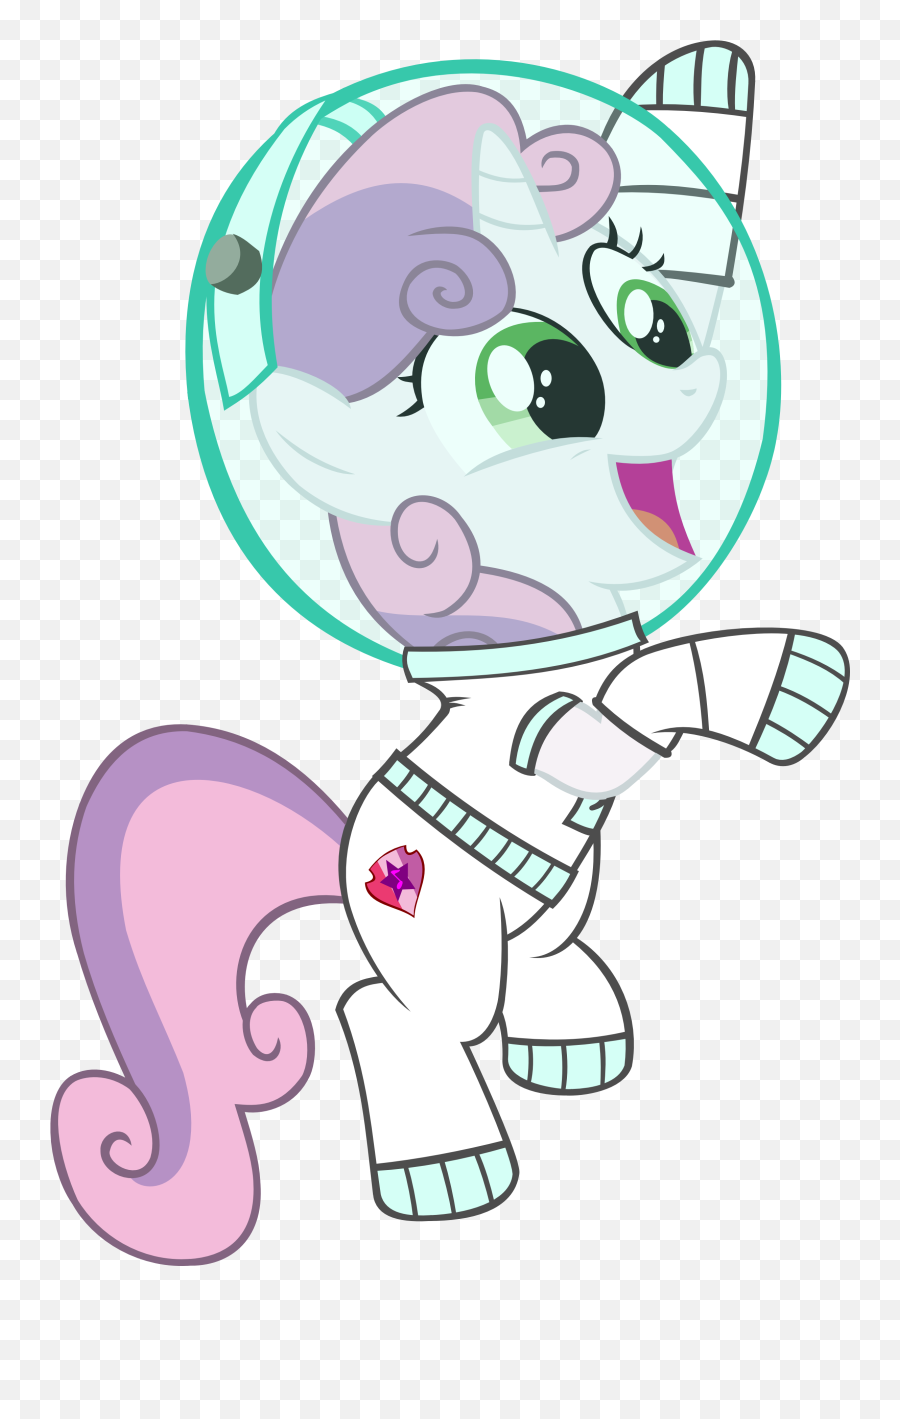 Astronaut Clipart Png - Astronaut Clipart Pink Cartoon Cutie Mark Crusaders With Cut Marks,Belle Transparent Background